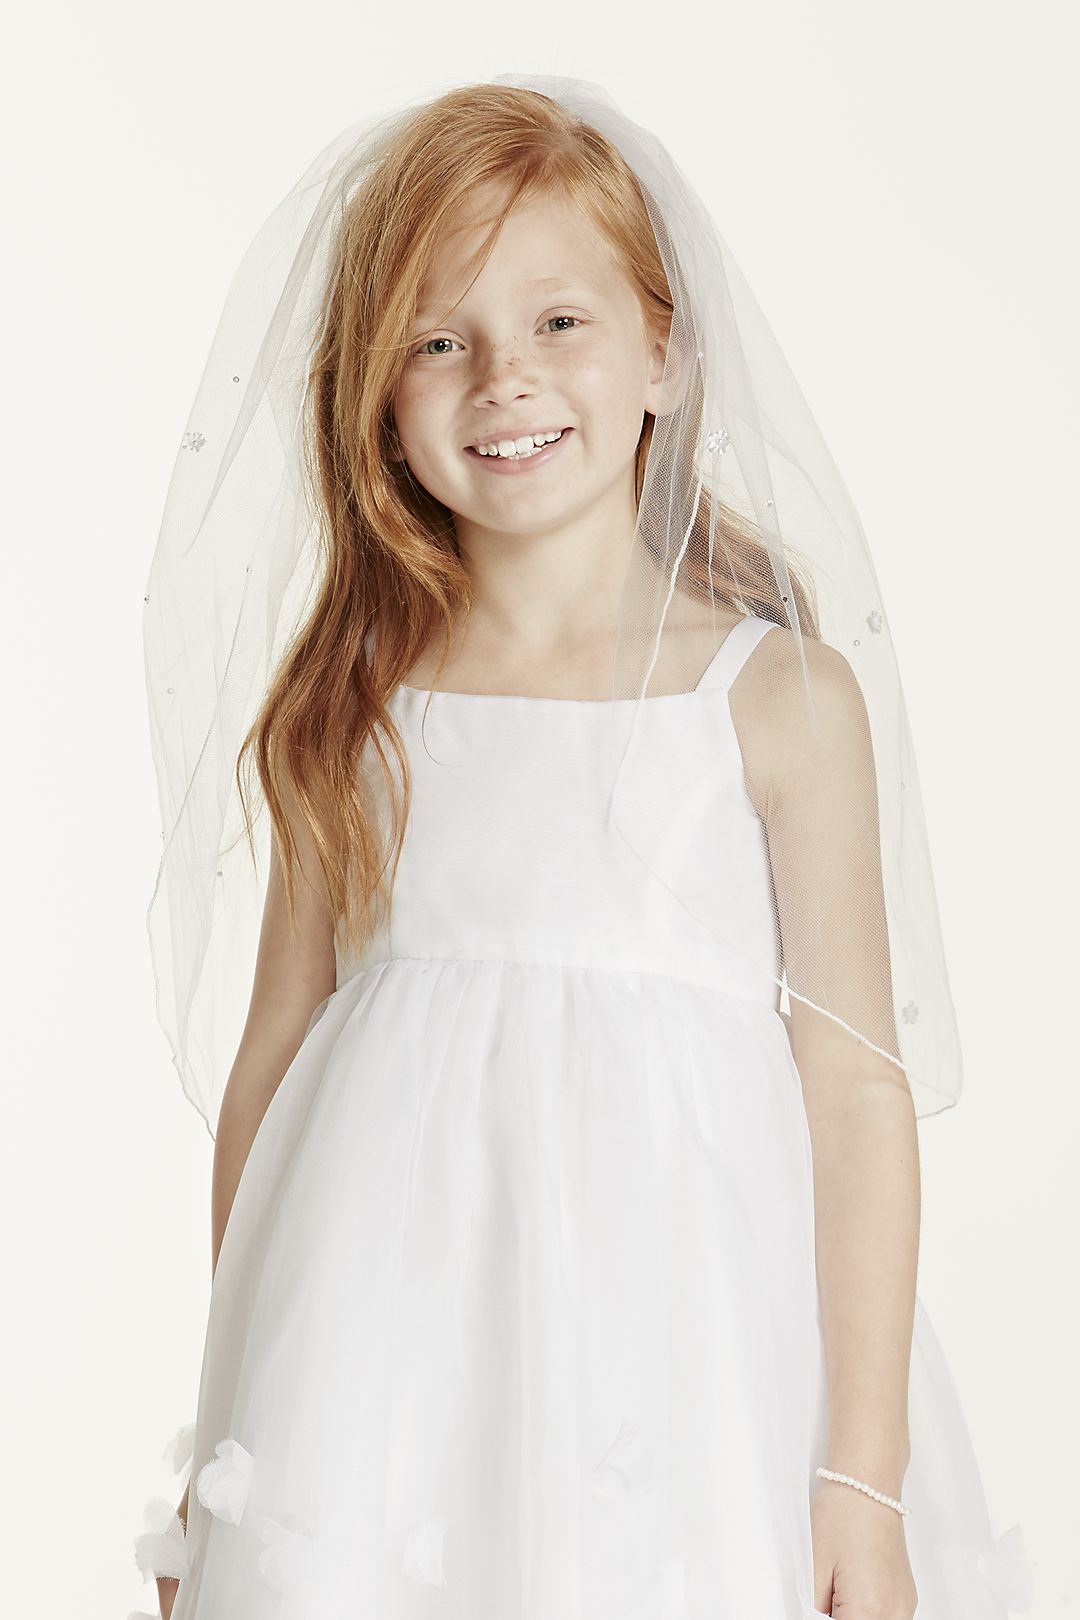 Communion Veil with Pearls Comb First Holy Communion Outfit, with Pearls +$5 / White